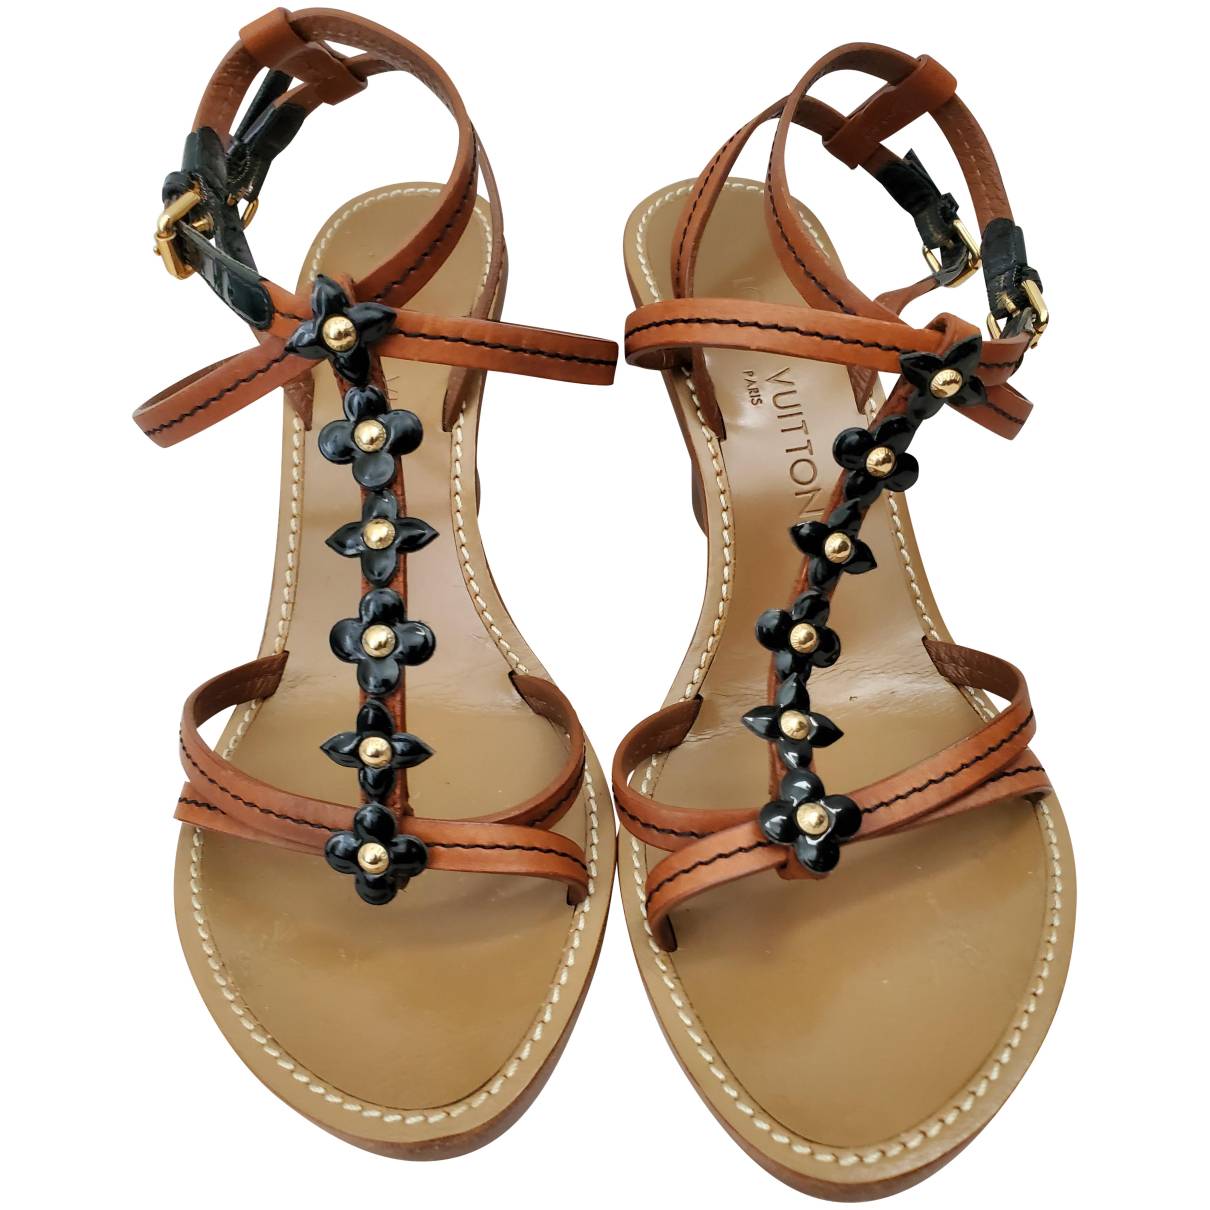 Leather sandal Louis Vuitton Brown size 36.5 EU in Leather - 25702350